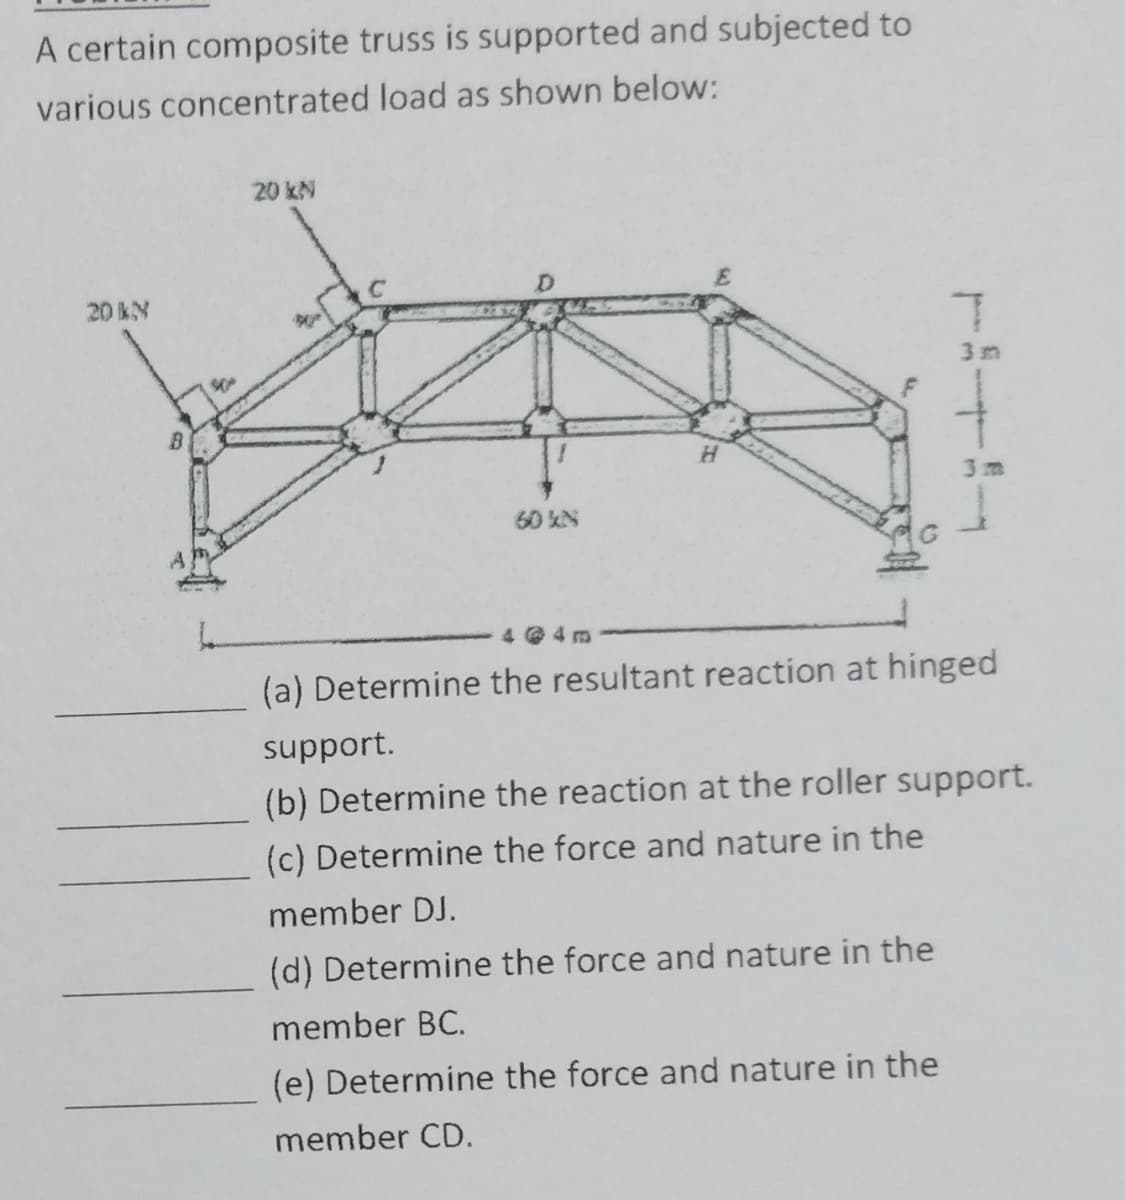 A certain composite truss is supported and subjected to
various concentrated load as shown below:
20 kN
20 kN
60 kN
T
3 m
Н
3 m
4@4m
(a) Determine the resultant reaction at hinged
support.
(b) Determine the reaction at the roller support.
(c) Determine the force and nature in the
member DJ.
(d) Determine the force and nature in the
member BC.
(e) Determine the force and nature in the
member CD.